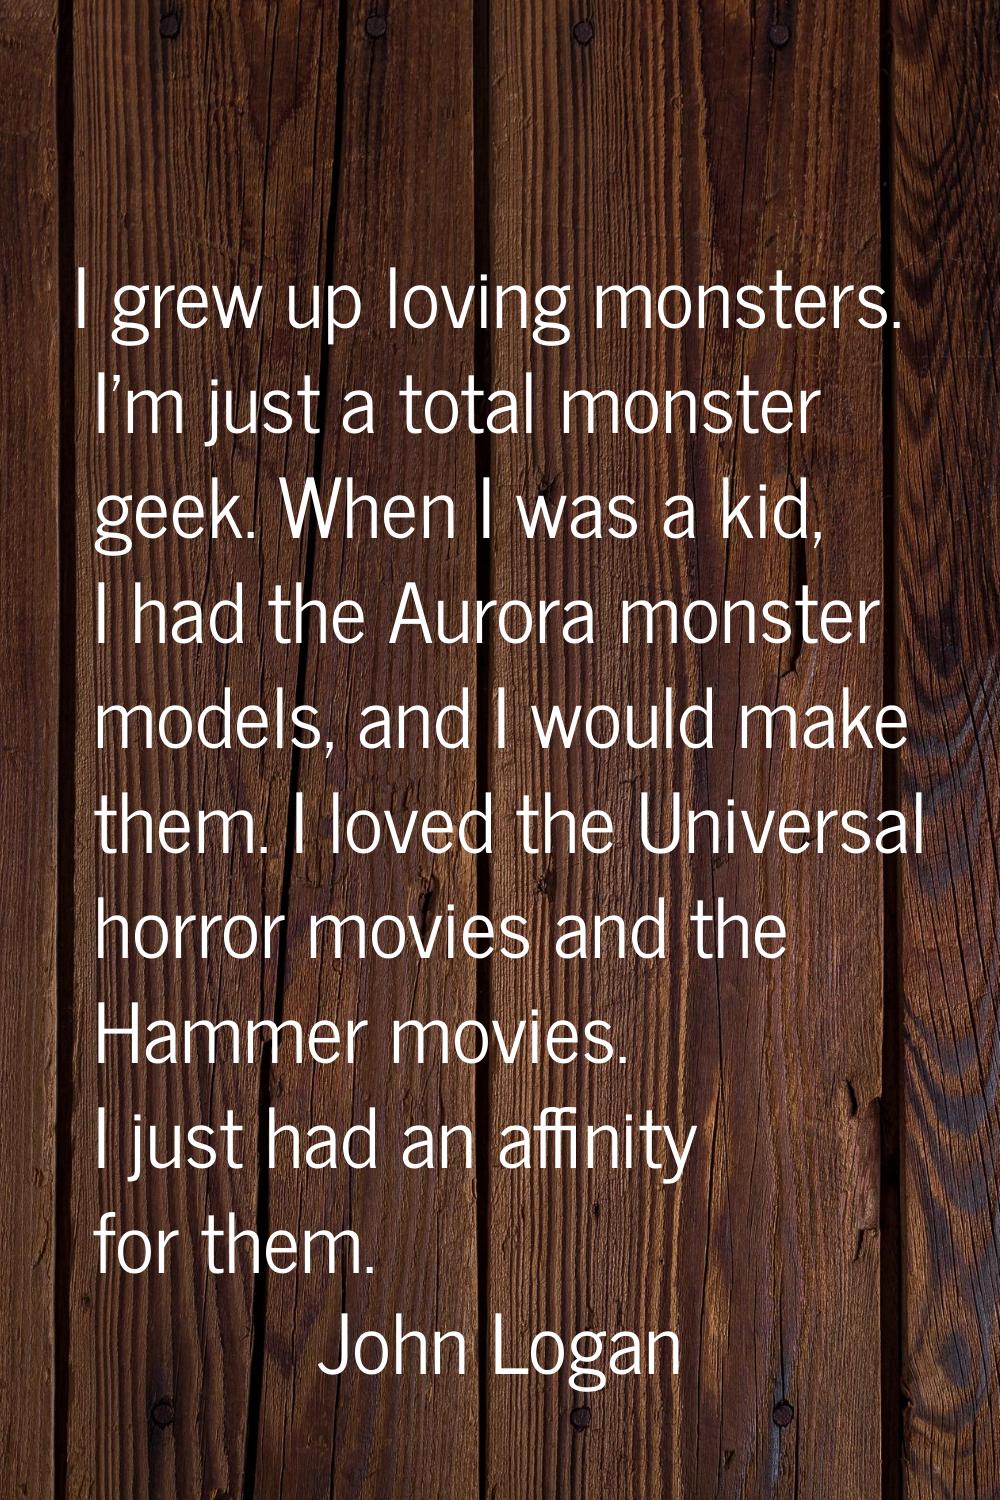 I grew up loving monsters. I'm just a total monster geek. When I was a kid, I had the Aurora monste